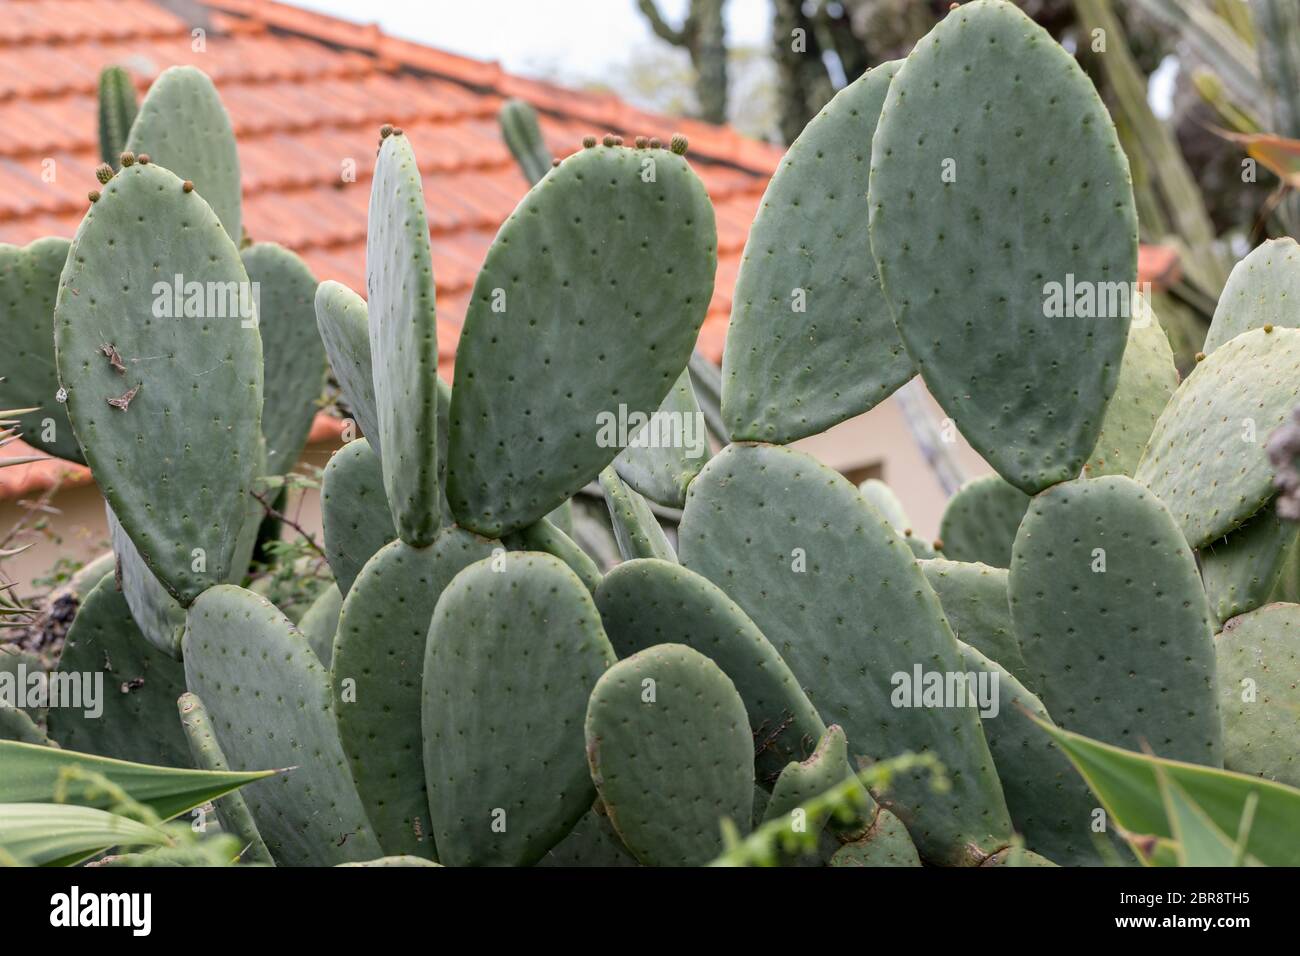 Opuntia vulgaris is a species of cactus that has long been a domesticated crop plant important in agricultural economies throughout arid and semiarid Stock Photo